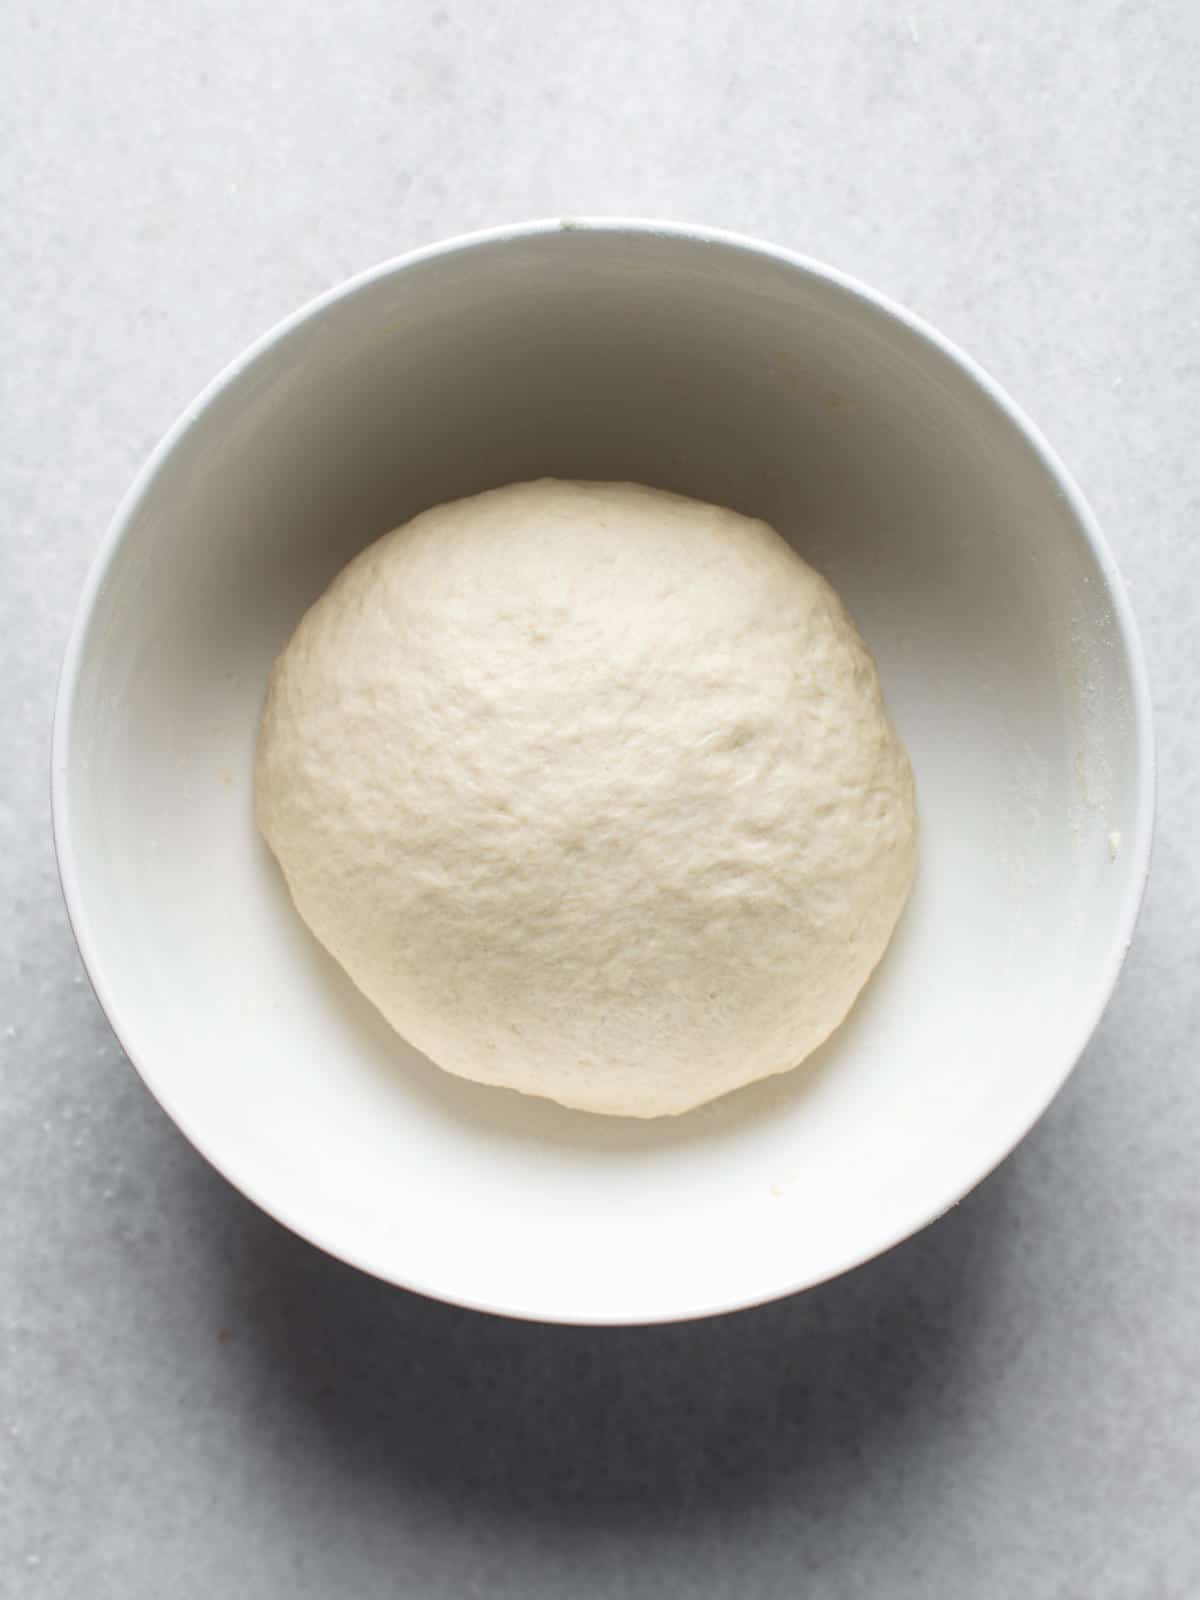 kneaded ball of dough in an oiled bowl for proofing.